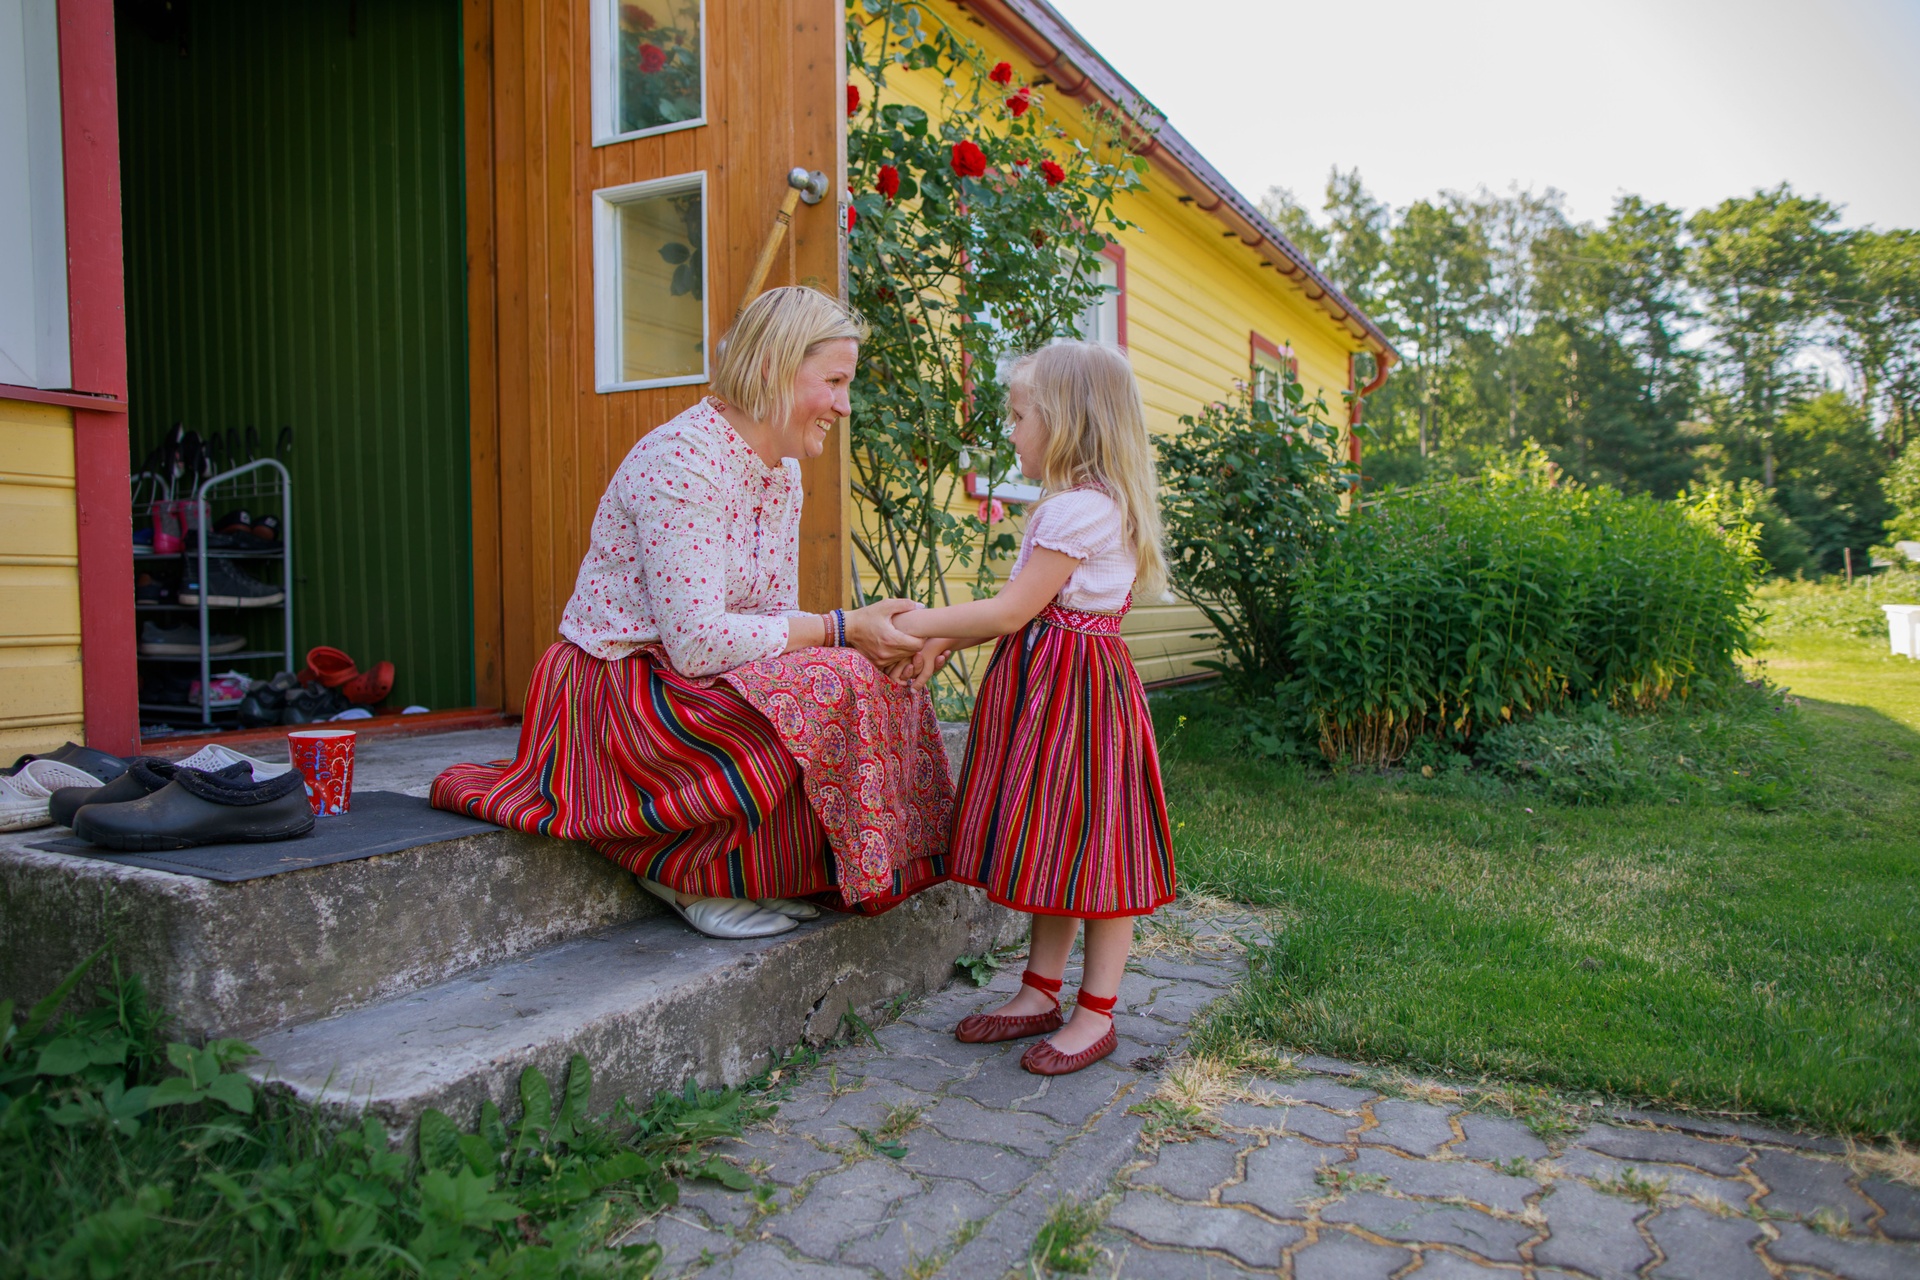 Estonian culture is passed down to future generations.